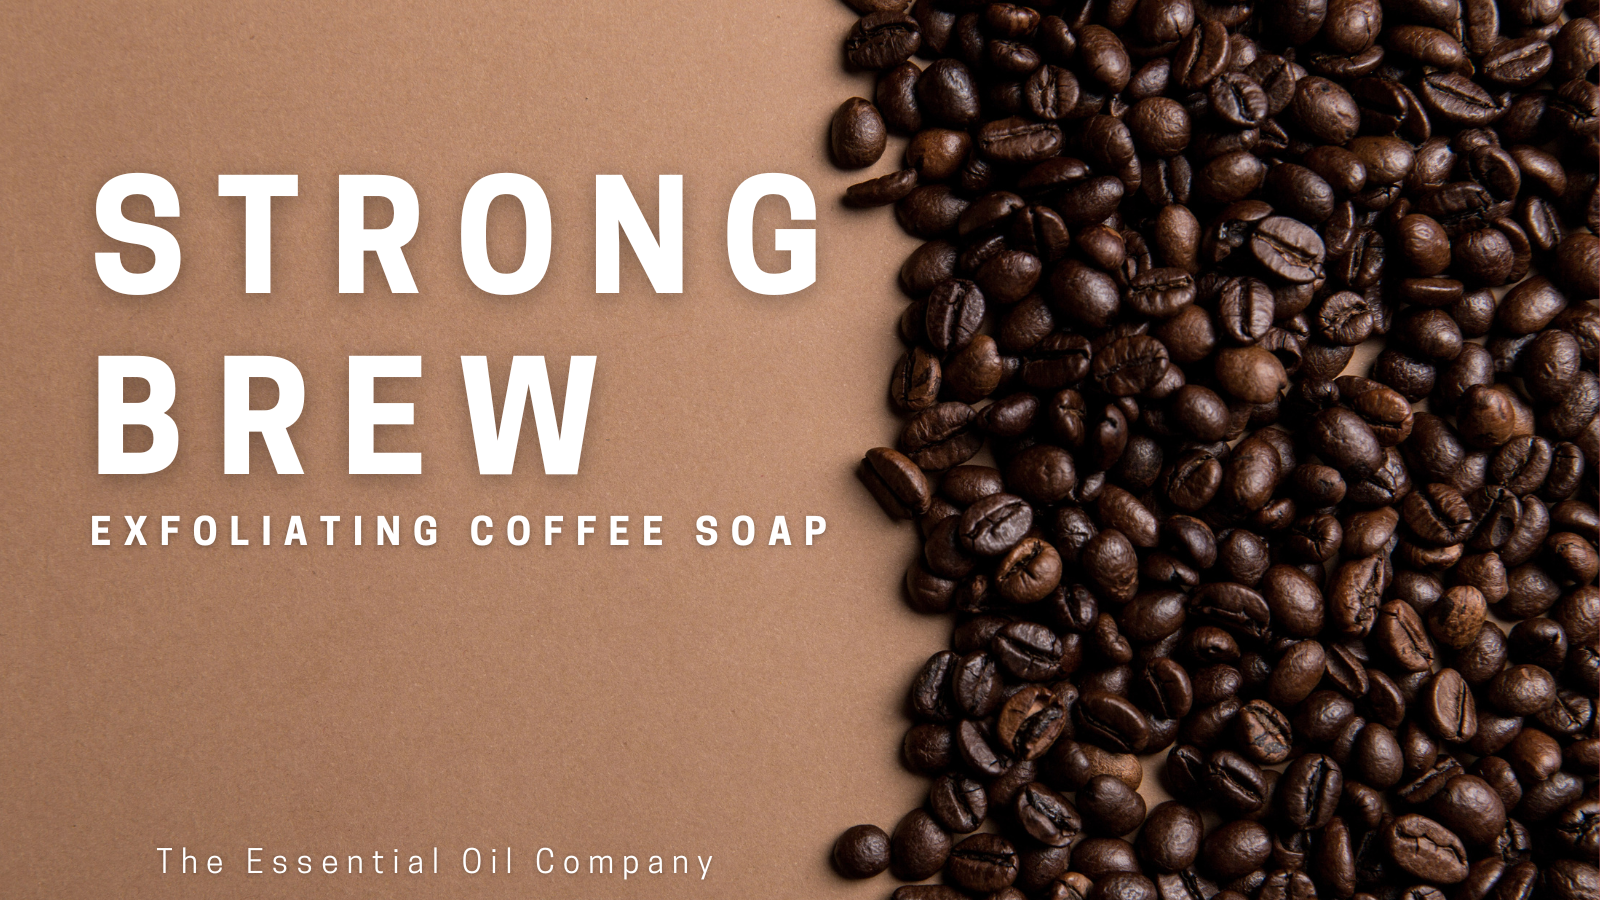 Strong Brew Exfoliating Coffee Soap